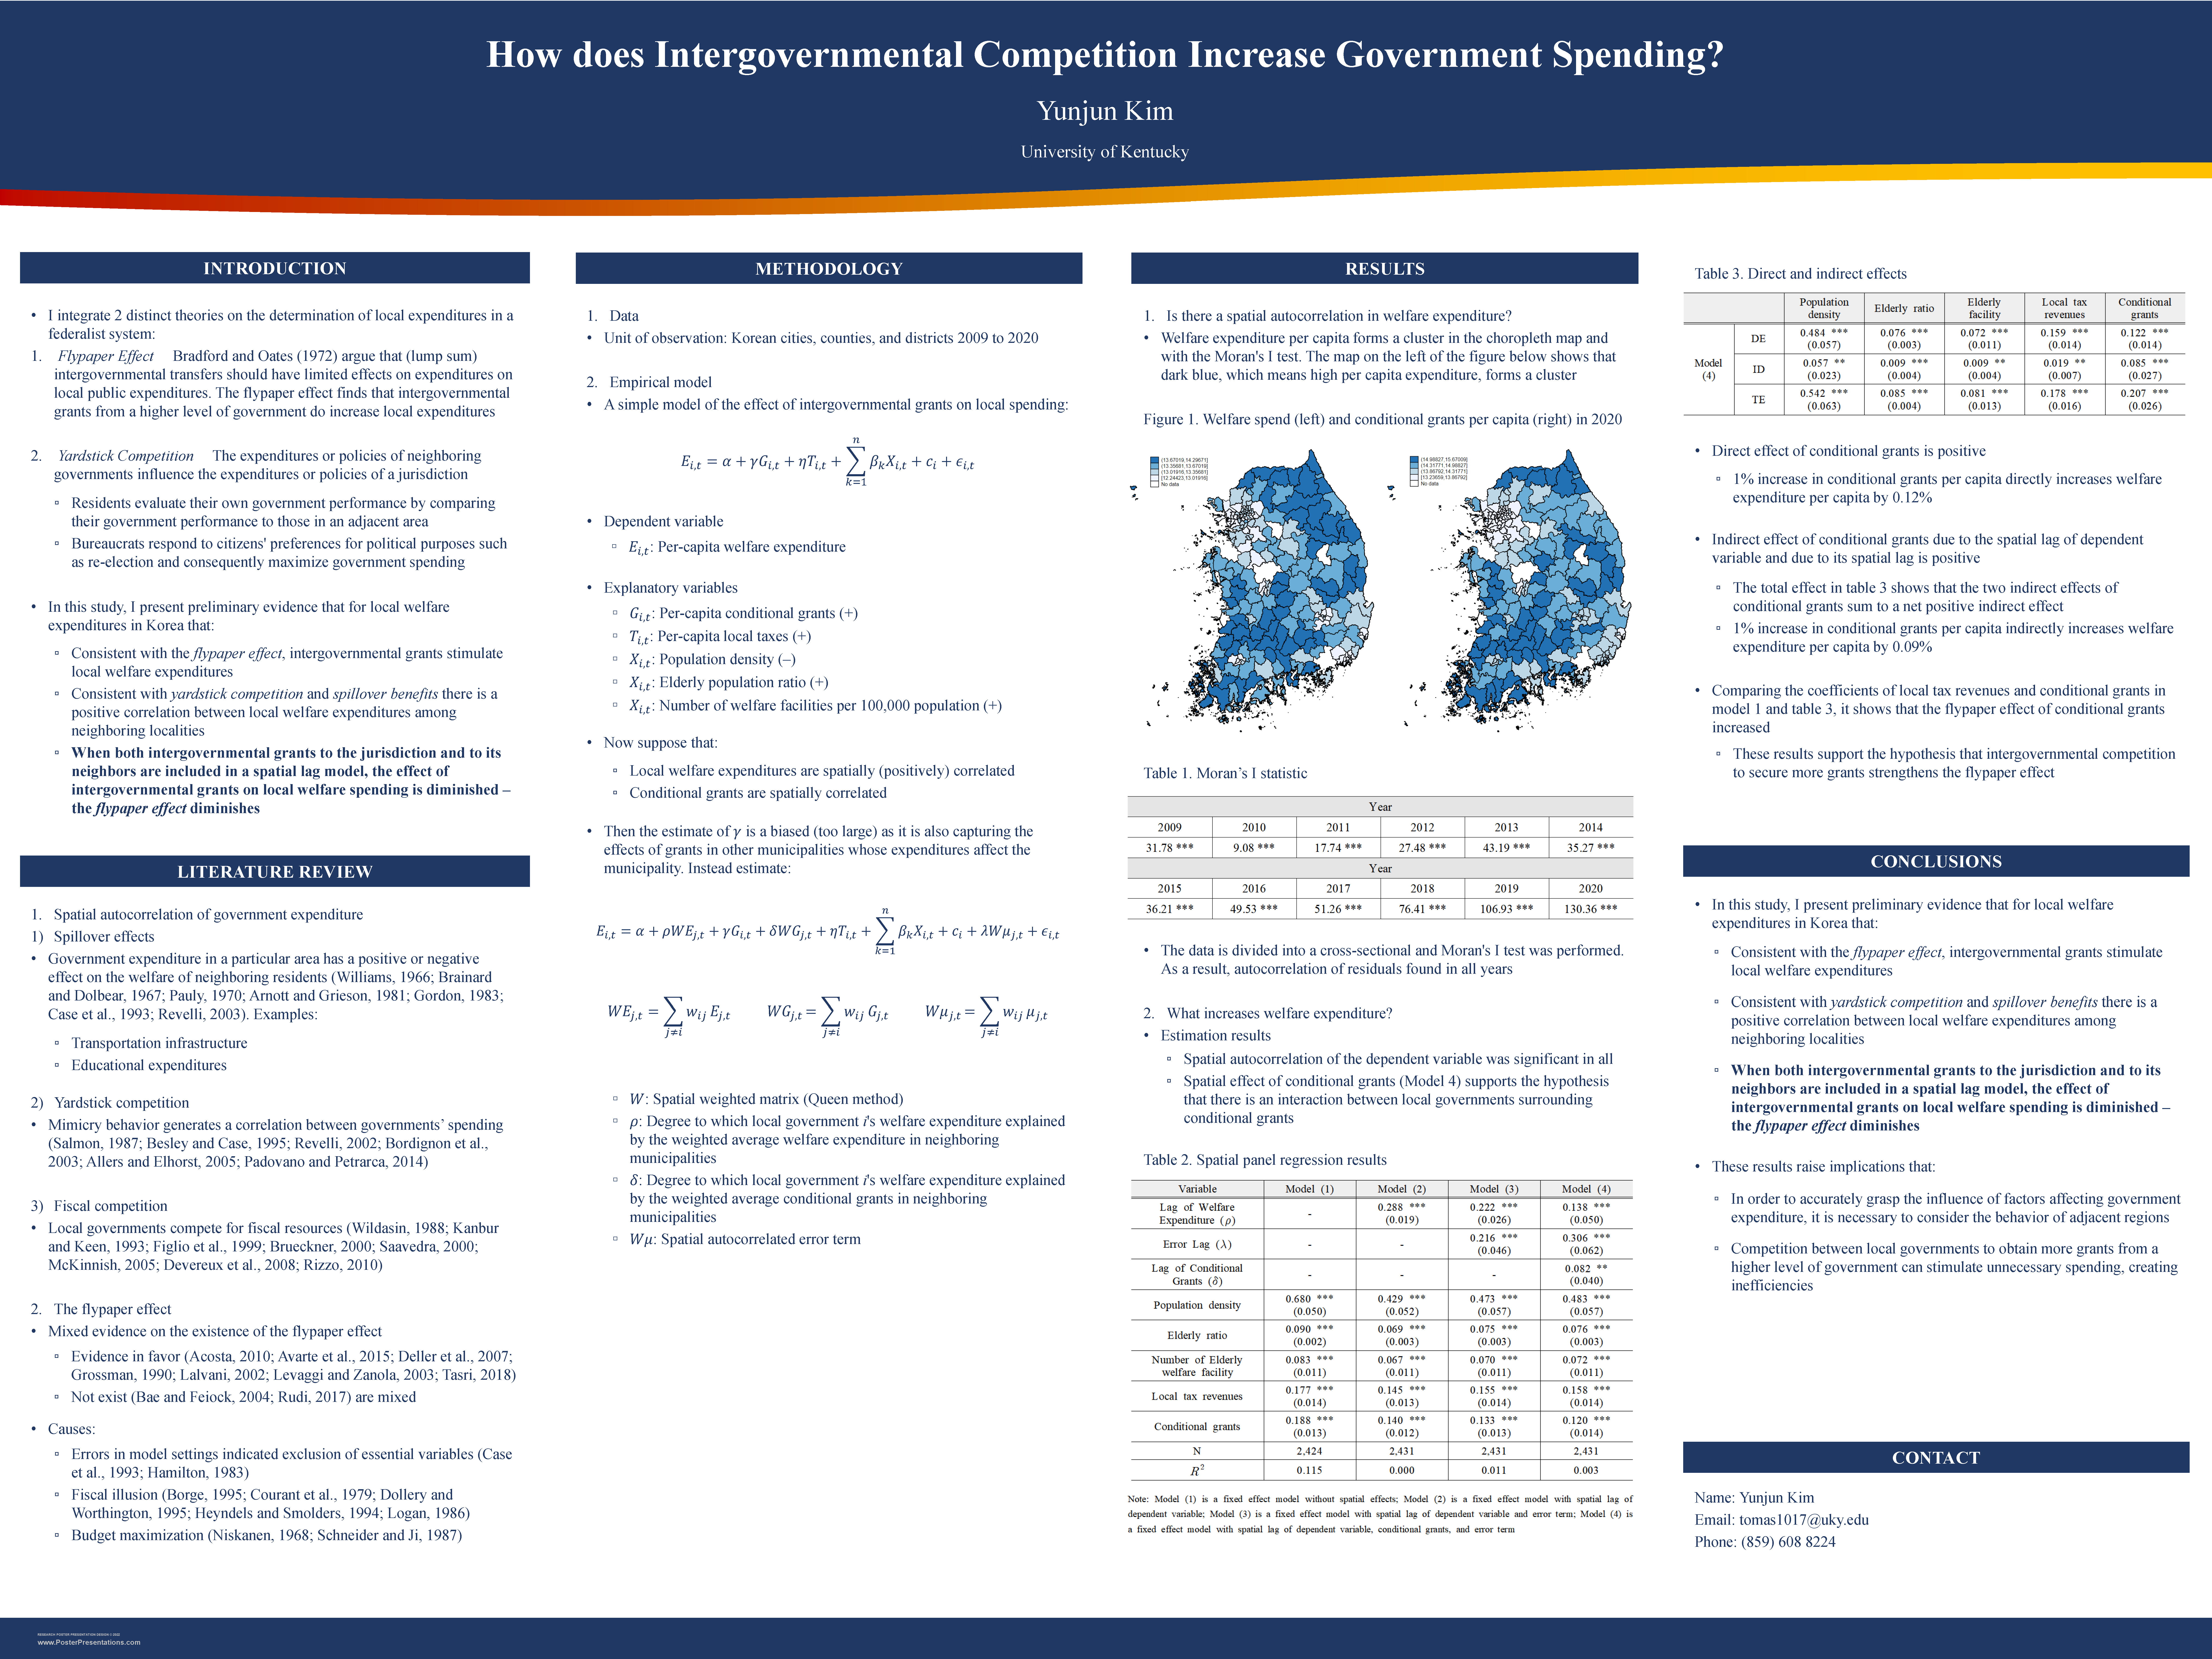 Yun Jun Kim's Poster "Our Congratulations to Yun Jun Kim for winning best graduate poster at @abfm_aspa for "How does intergovernmental competition increase government spending?" for ABFM